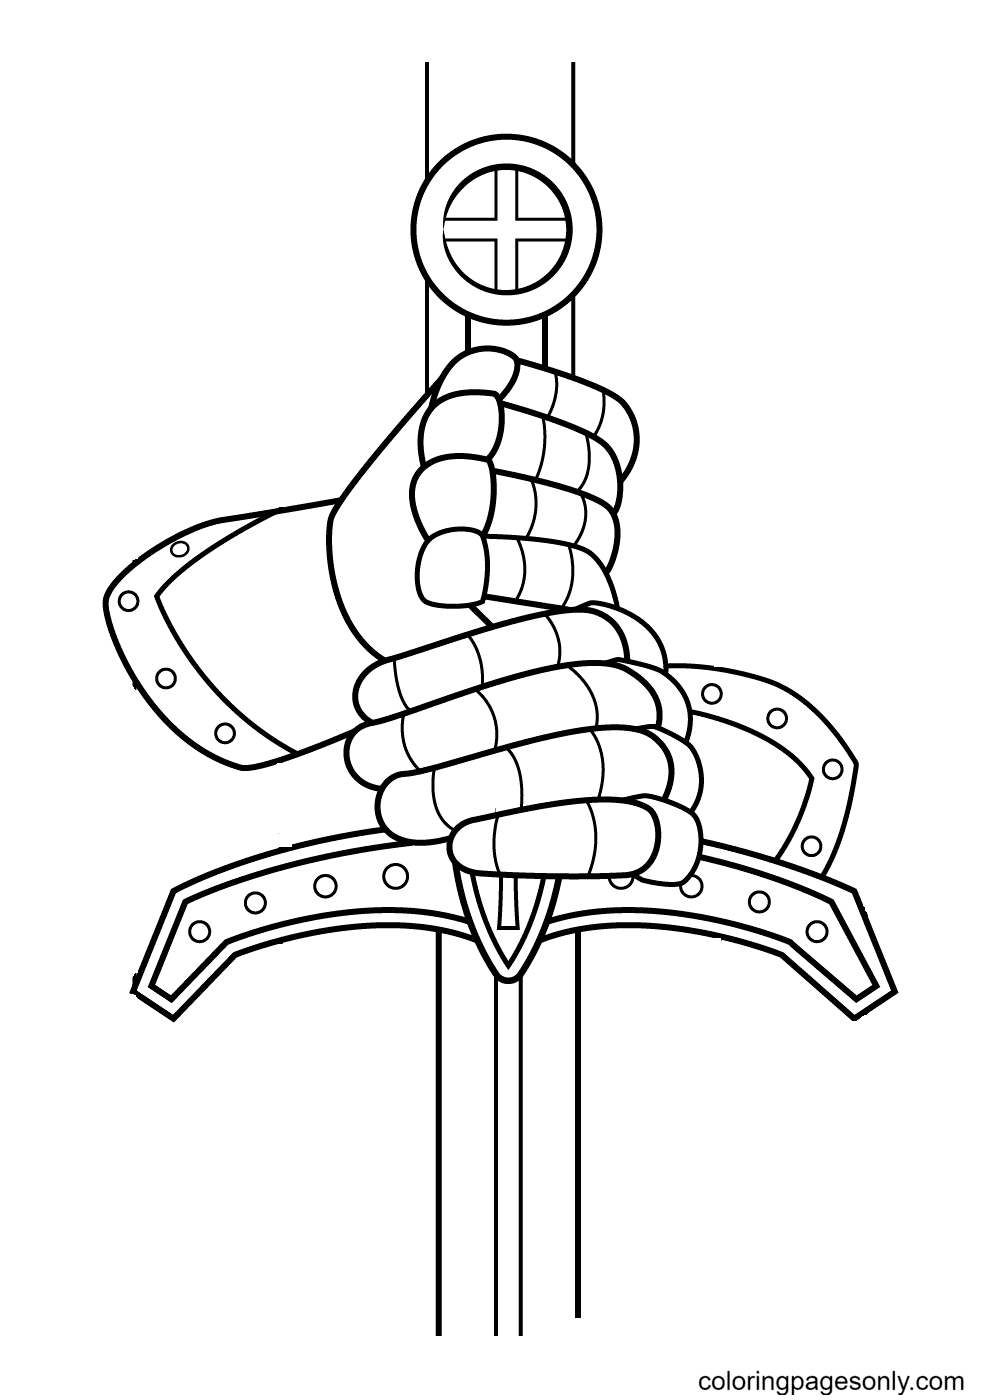 The Knight’s Hand Grasps the Sword Coloring Pages